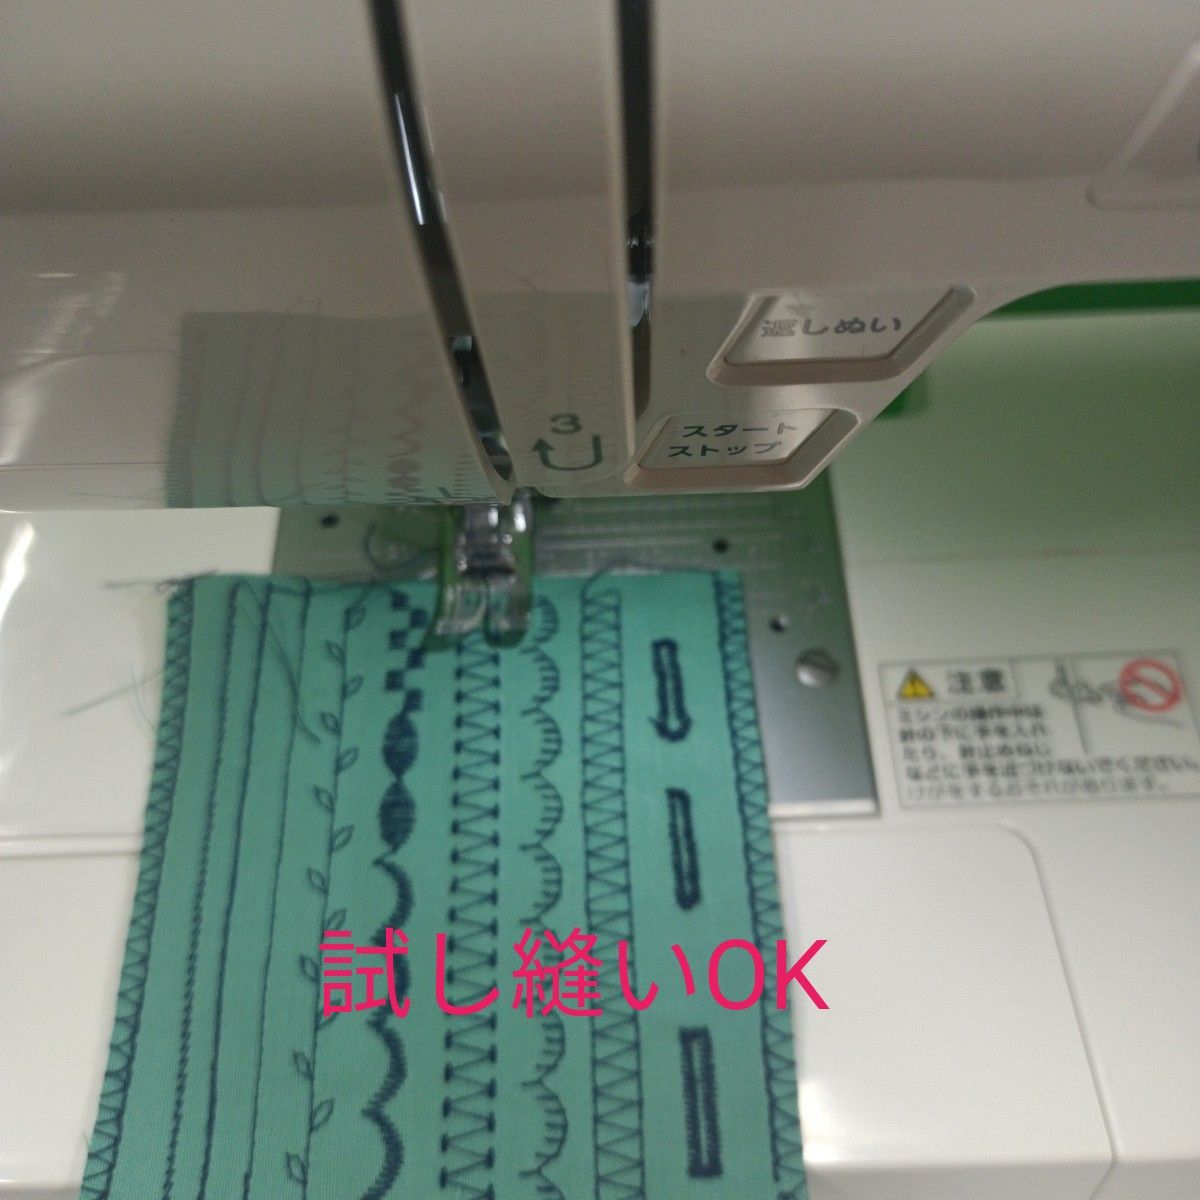 JANOME PericiaNK5505型コンピューターミシン